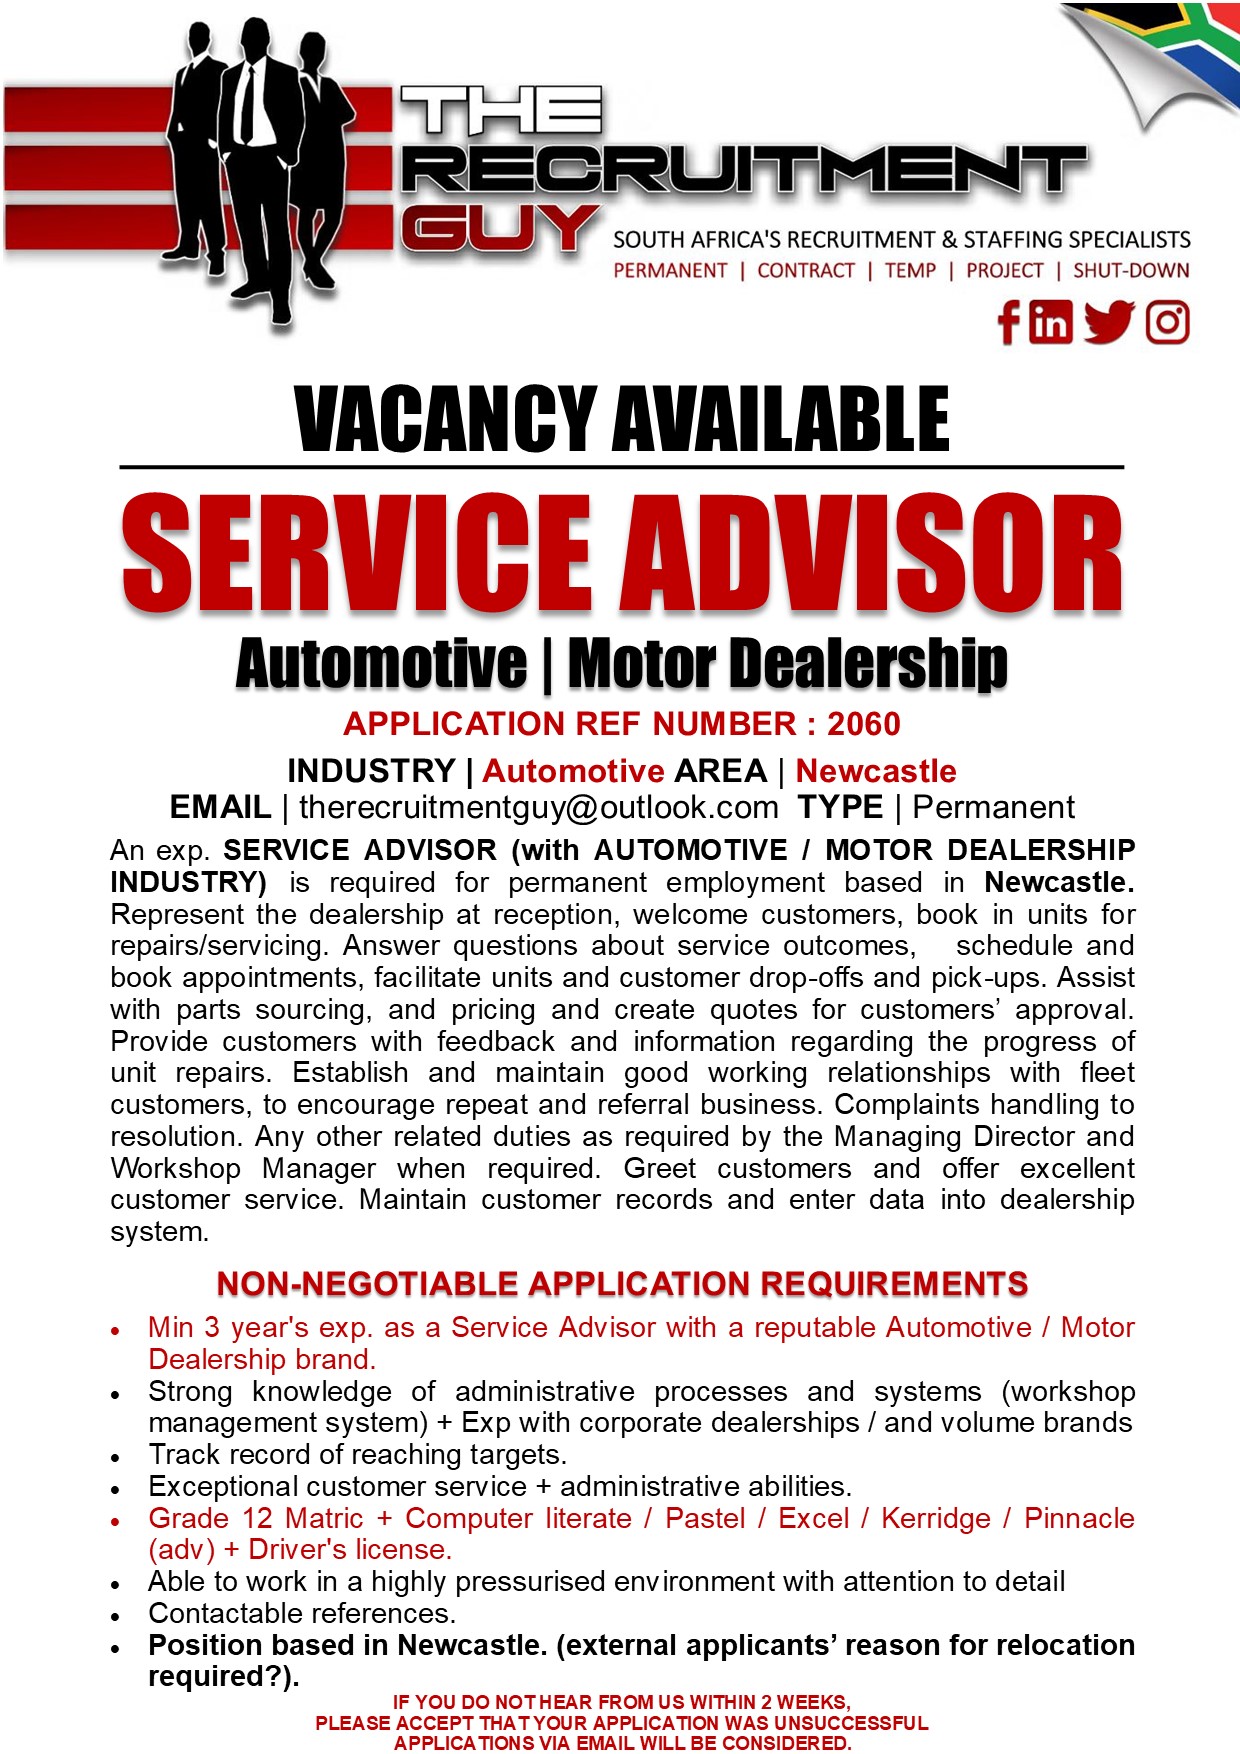 GUY SOUTH AFRICA'S RECRUITMENT & STAFFING SPECIALISTS

VACANCY AVAILABLE

APPLICATION REF NUMBER : 2060

INDUSTRY | Automotive AREA | Newcastle
EMAIL | therecruitmentguy@outlook.com TYPE | Permanent

An exp. SERVICE ADVISOR (with AUTOMOTIVE / MOTOR DEALERSHIP
INDUSTRY) is required for permanent employment based in Newcastle.
Represent the dealership at reception, welcome customers, book in units for
repairs/servicing. Answer questions about service outcomes, schedule and
book appointments, facilitate units and customer drop-offs and pick-ups. Assist
with parts sourcing, and pricing and create quotes for customers’ approval
Provide customers with feedback and information regarding the progress of
unit repairs. Establish and maintain good working relationships with fleet
customers, to encourage repeat and referral business. Complaints handling to
resolution. Any other related duties as required by the Managing Director and
Workshop Manager when required. Greet customers and offer excellent
customer service. Maintain customer records and enter data into dealership
system

NON-NEGOTIABLE APPLICATION REQUIREMENTS

« Min 3 year's exp. as a Service Advisor with a reputable Automotive / Motor
Dealership brand

« Strong knowledge of administrative processes and systems (workshop
management system) + Exp with corporate dealerships / and volume brands

« Track record of reaching targets

« Exceptional customer service + administrative abilities

+ Grade 12 Matric + Computer literate / Pastel / Excel / Kerridge / Pinnacle
(adv) + Driver's license

« Able to work in a highly pressurised environment with attention to detail

« Contactable references

« Position based in Newcastle. (external applicants’ reason for relocation

required?).
IF YOU DO NOTHEAR FROM US WITHIN 2 WEEKS,
PLEASE ACCEPT THAT YOUR APPLICATION WAS UNSUCCESSFUL
APPLICATIONS VIA EMAIL WILL BE CONSIDERED.

PERMANENT | CONTRACT | TEMP | PROJECT | SHUT-DOWN

{ink JG]